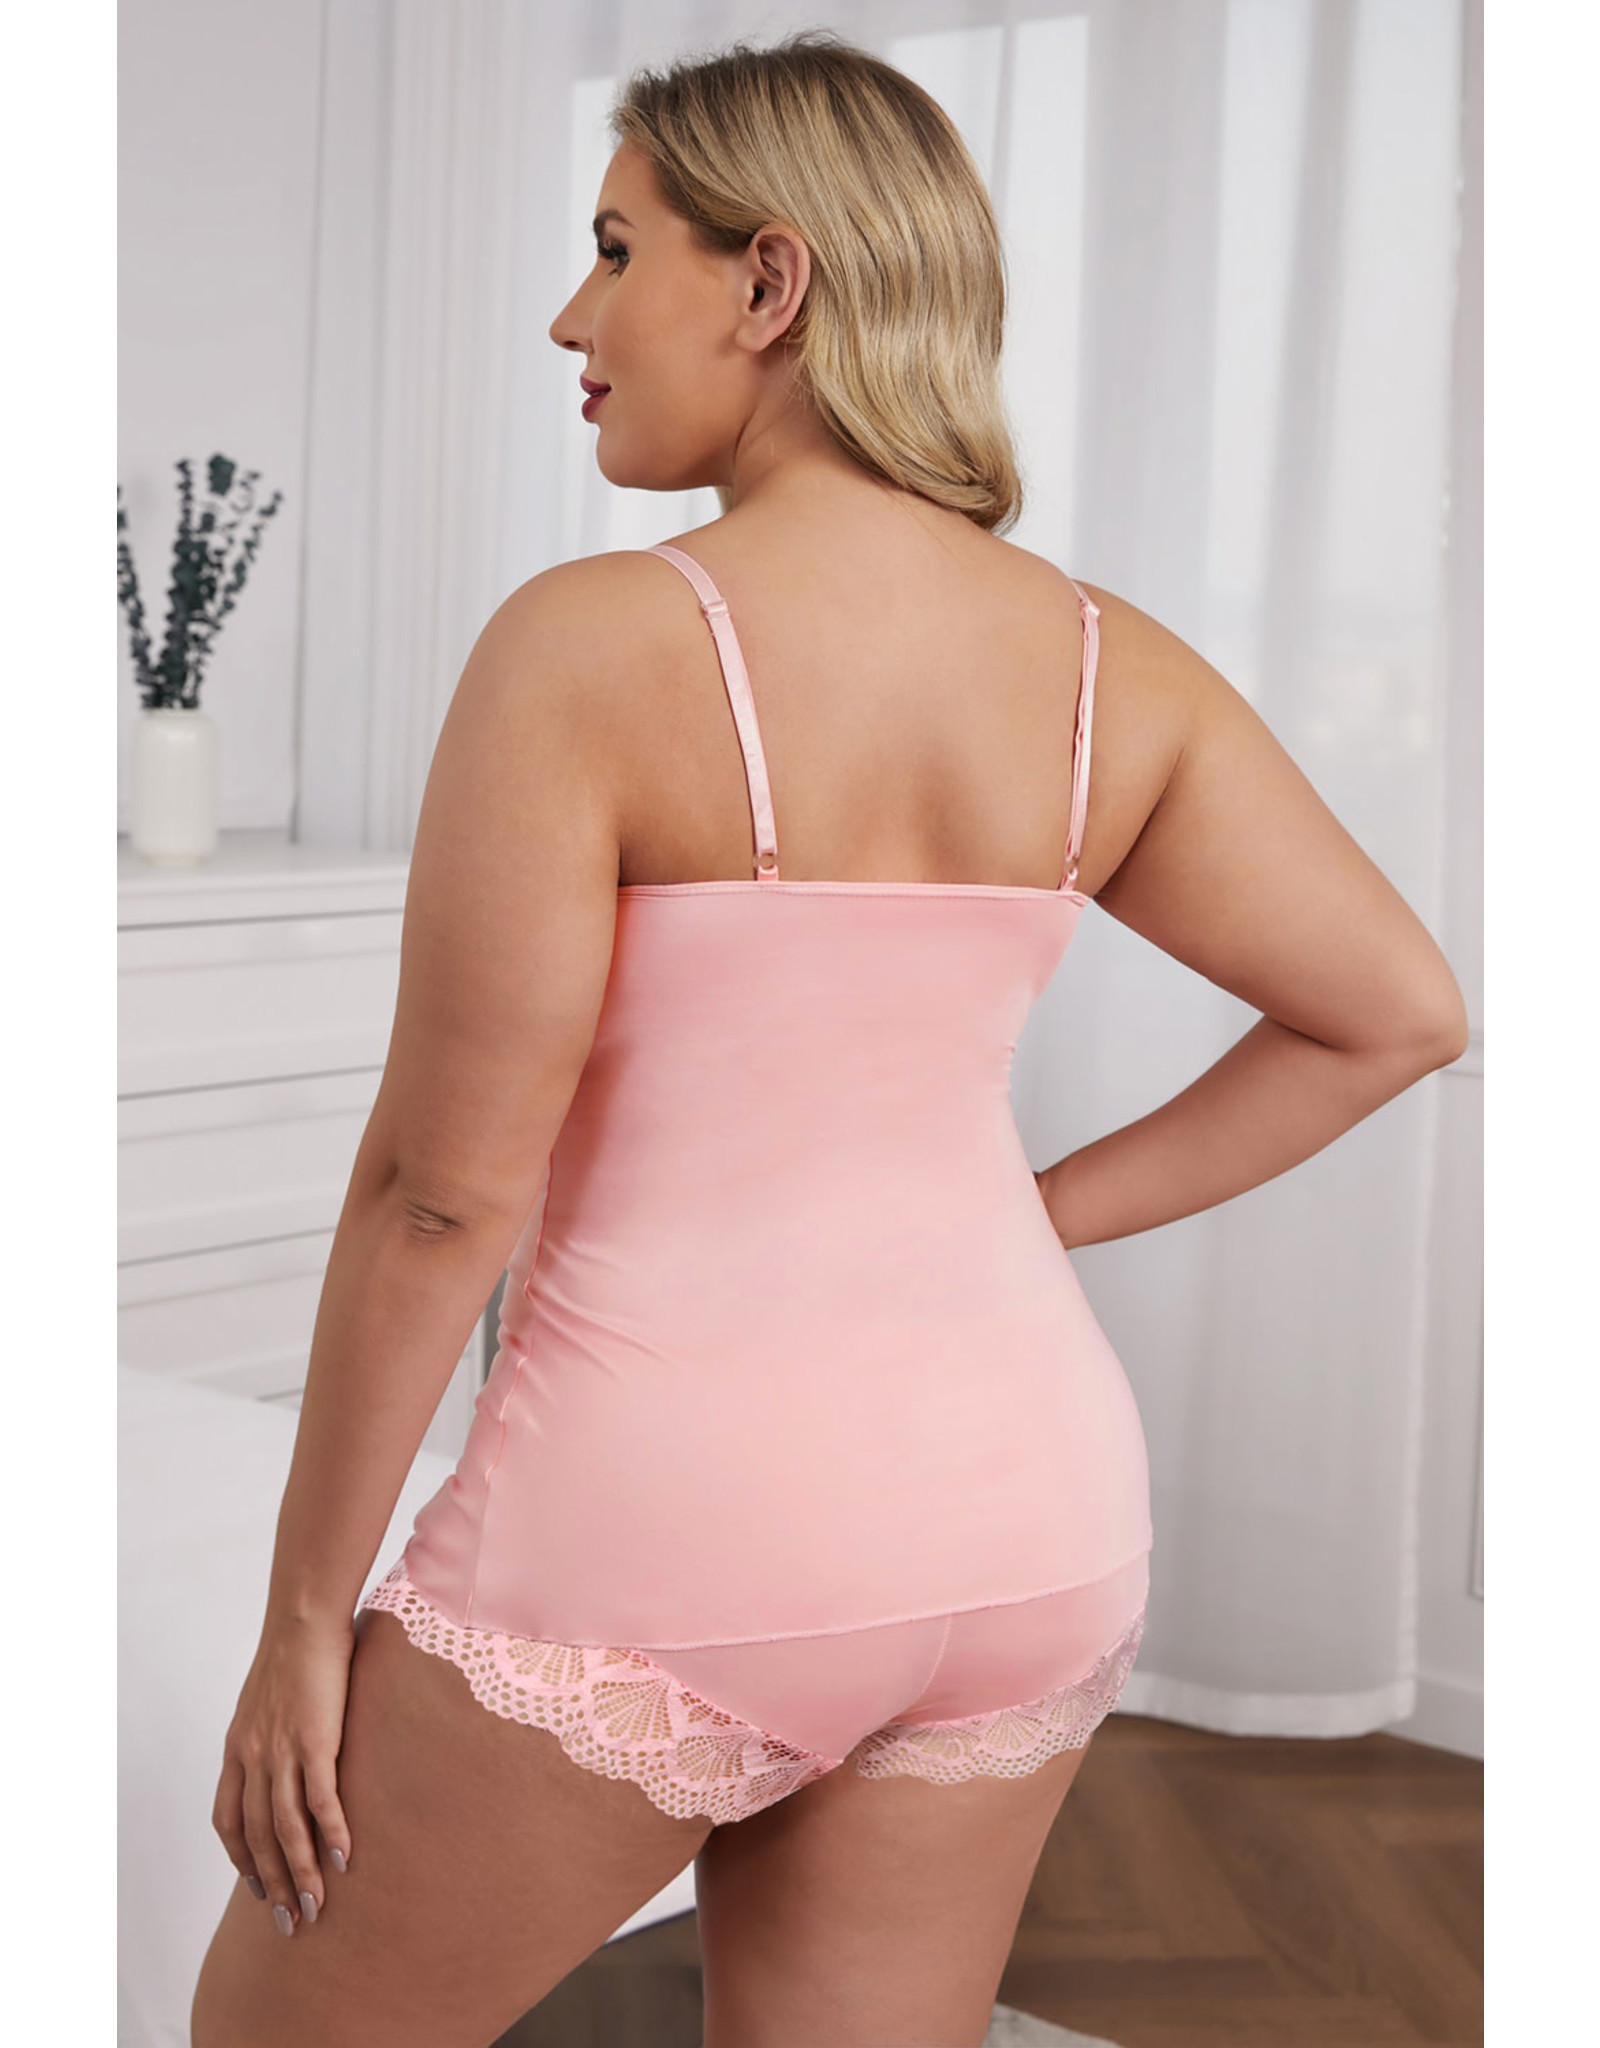 PINK LACE SPLICING CAMI TOP AND SHORTS PLUS SIZE LINGERIE SET PINK, SIZE:(US 26-28)4X